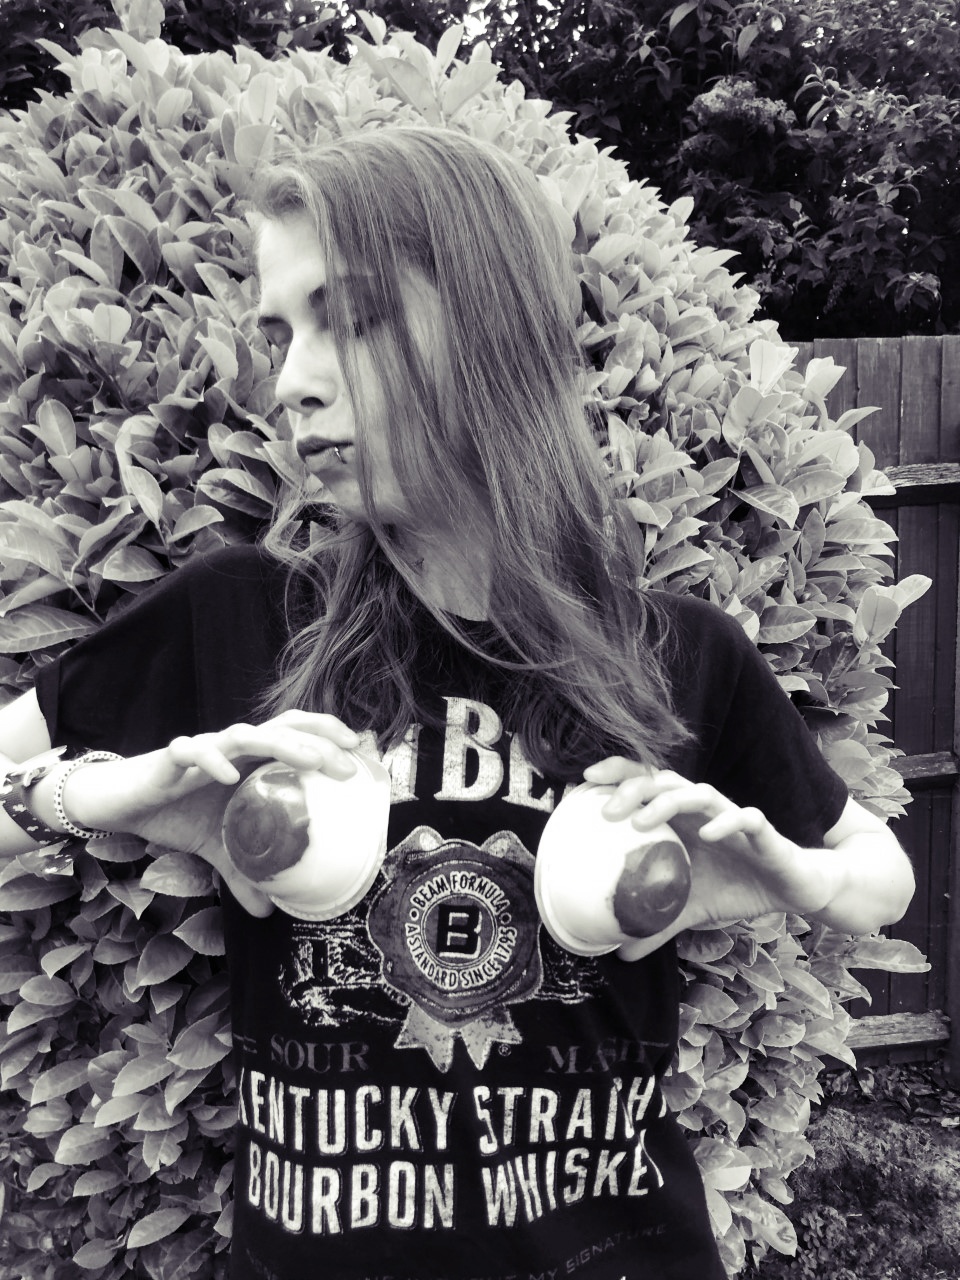 A photo of me in the garden in black and white, wearing a t-shirt and holding up two yoghurts (white with a red part at the bottom which looks like a boob). I've got my head tilted to the side and I'm pouting.